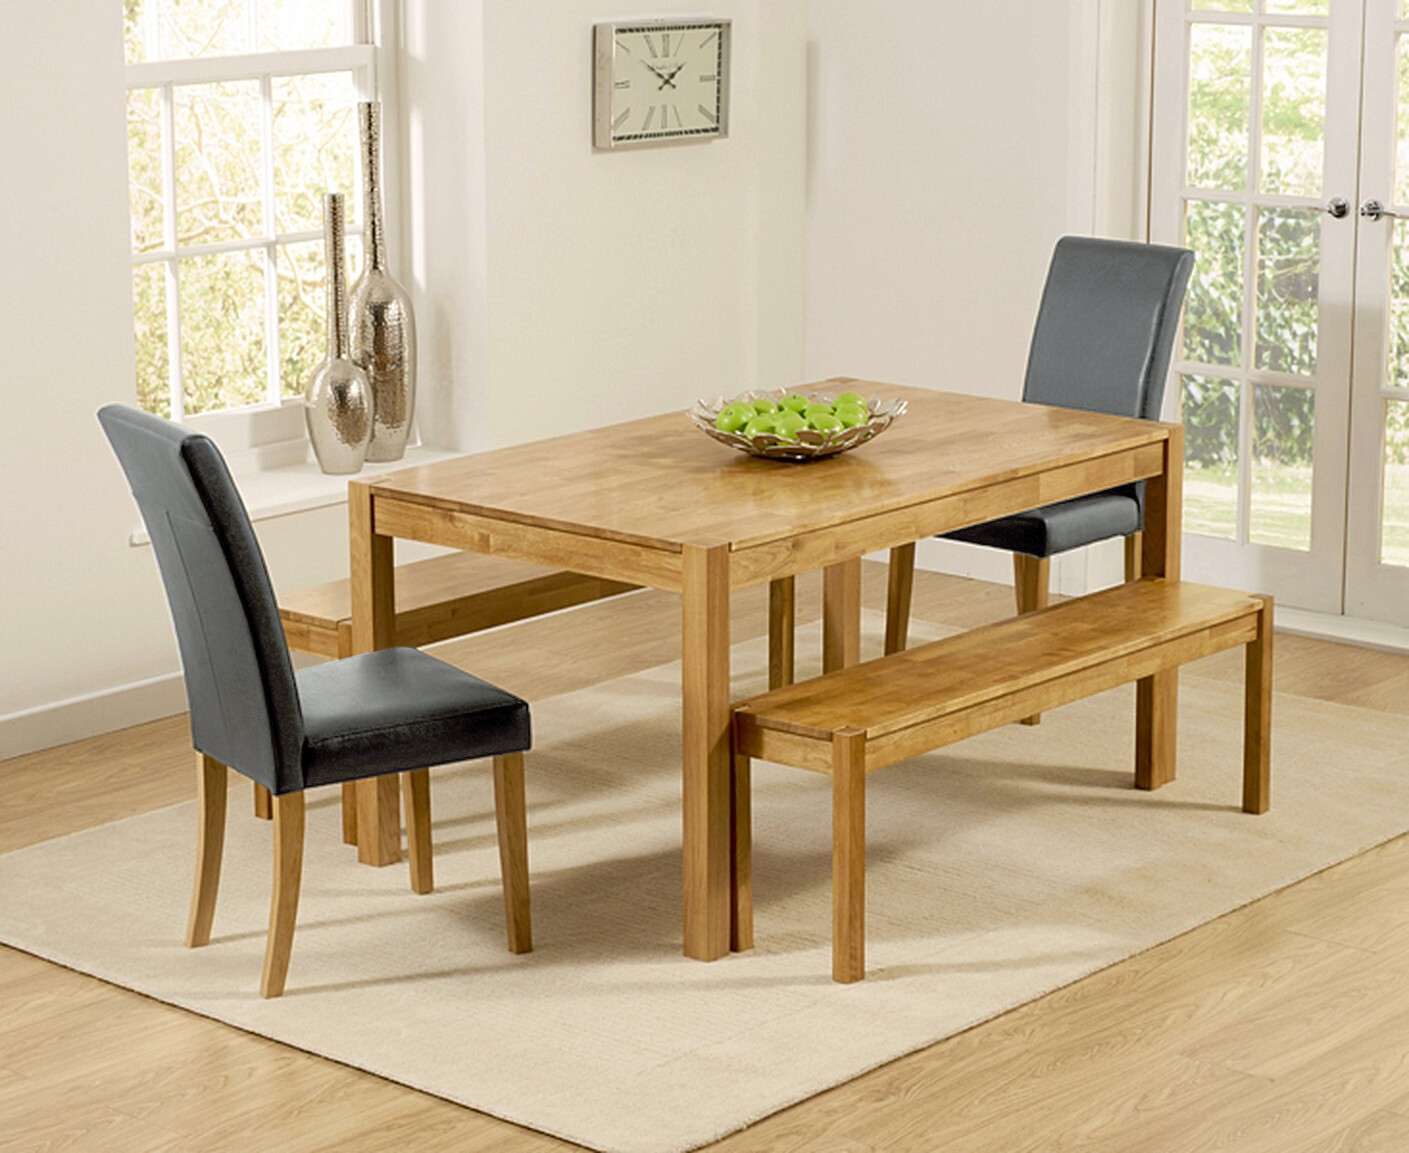 Photo 1 of York 150cm solid oak dining table with 4 grey olivia chairs and 2 york bencheses